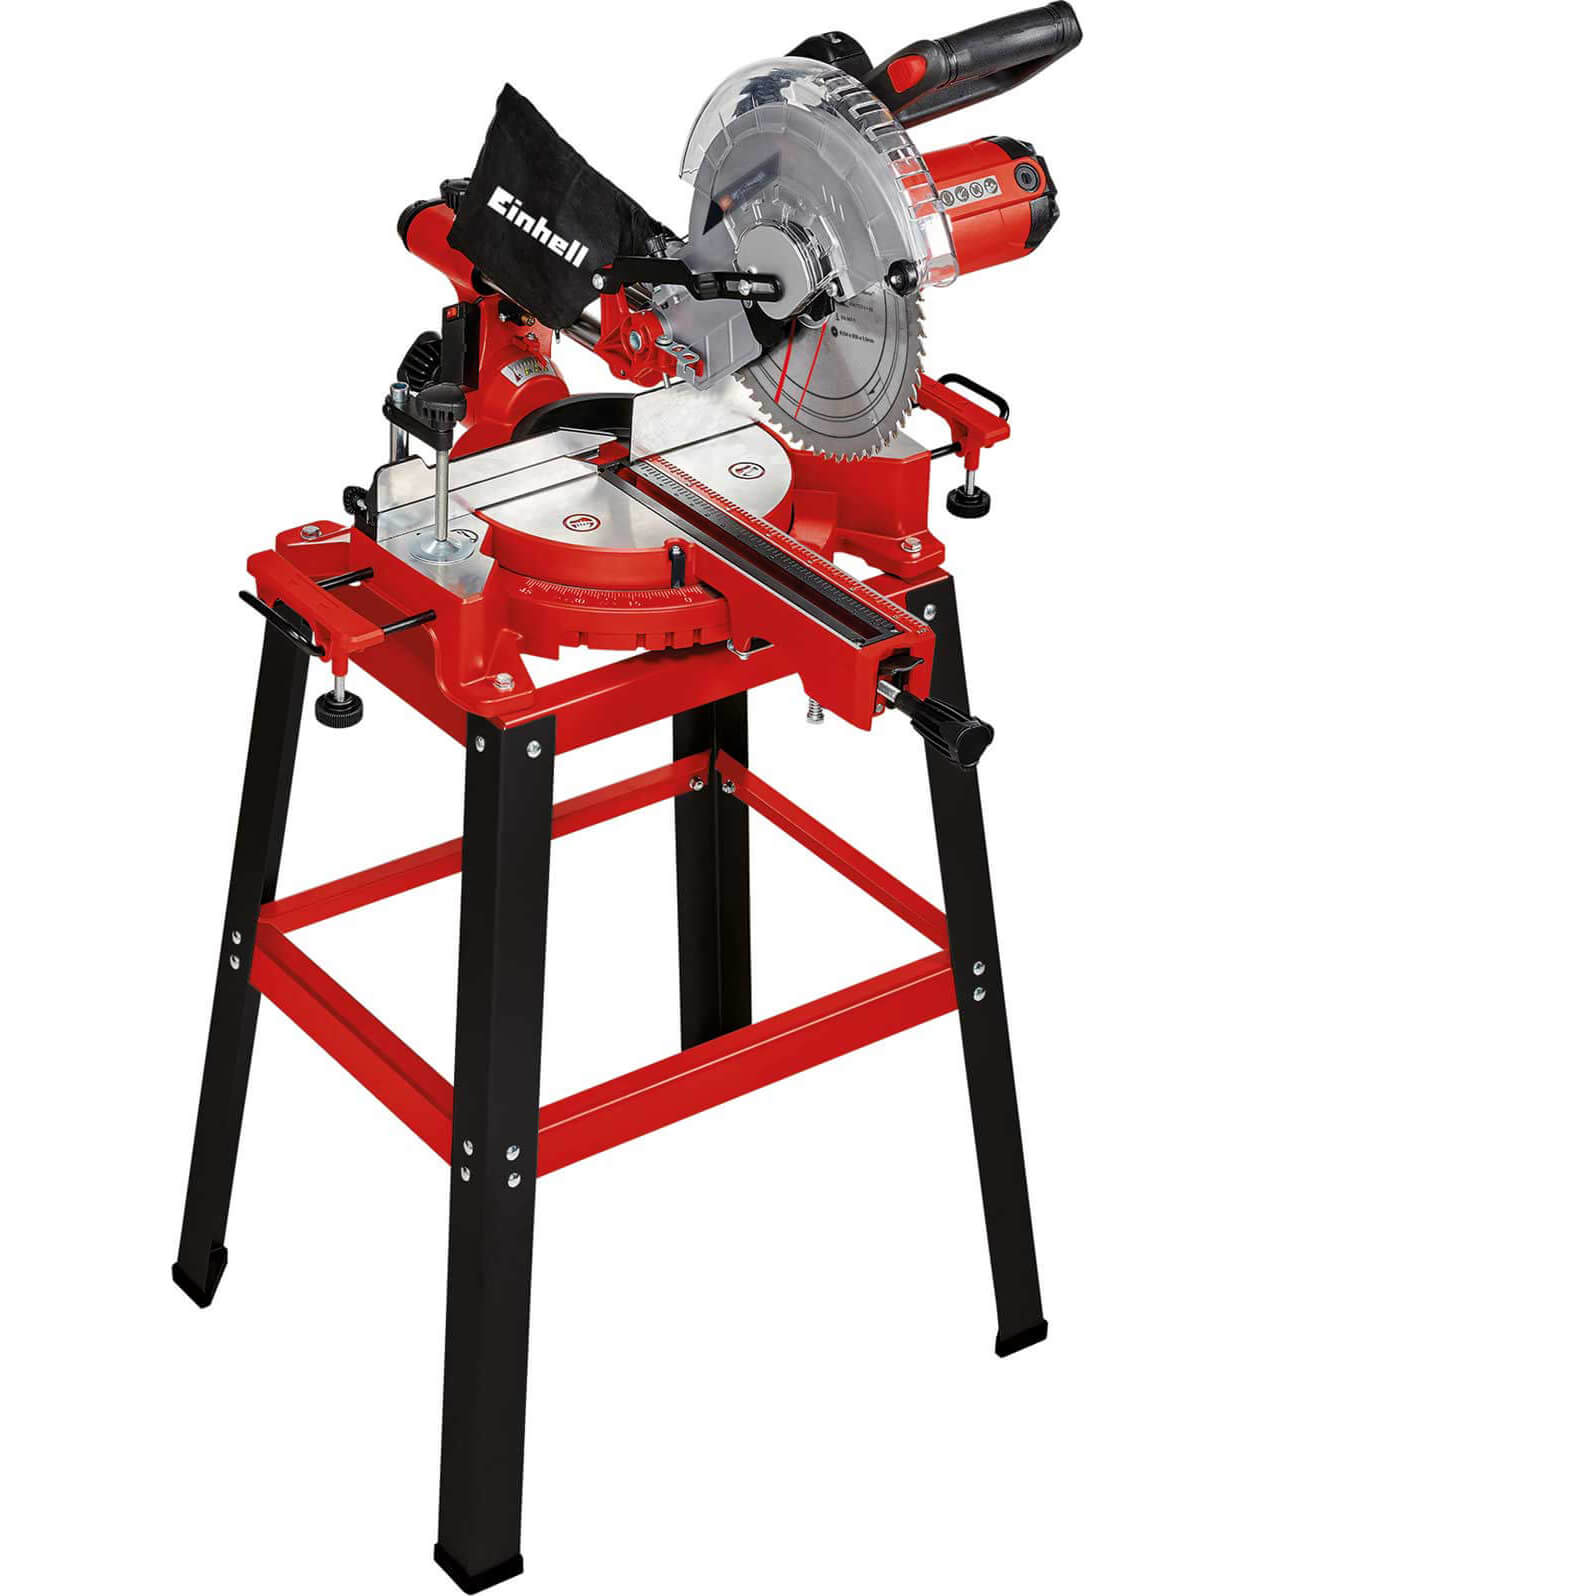 Image of Einhell TC-SM 2531/2 U Sliding Mitre Saw 254mm with Stand